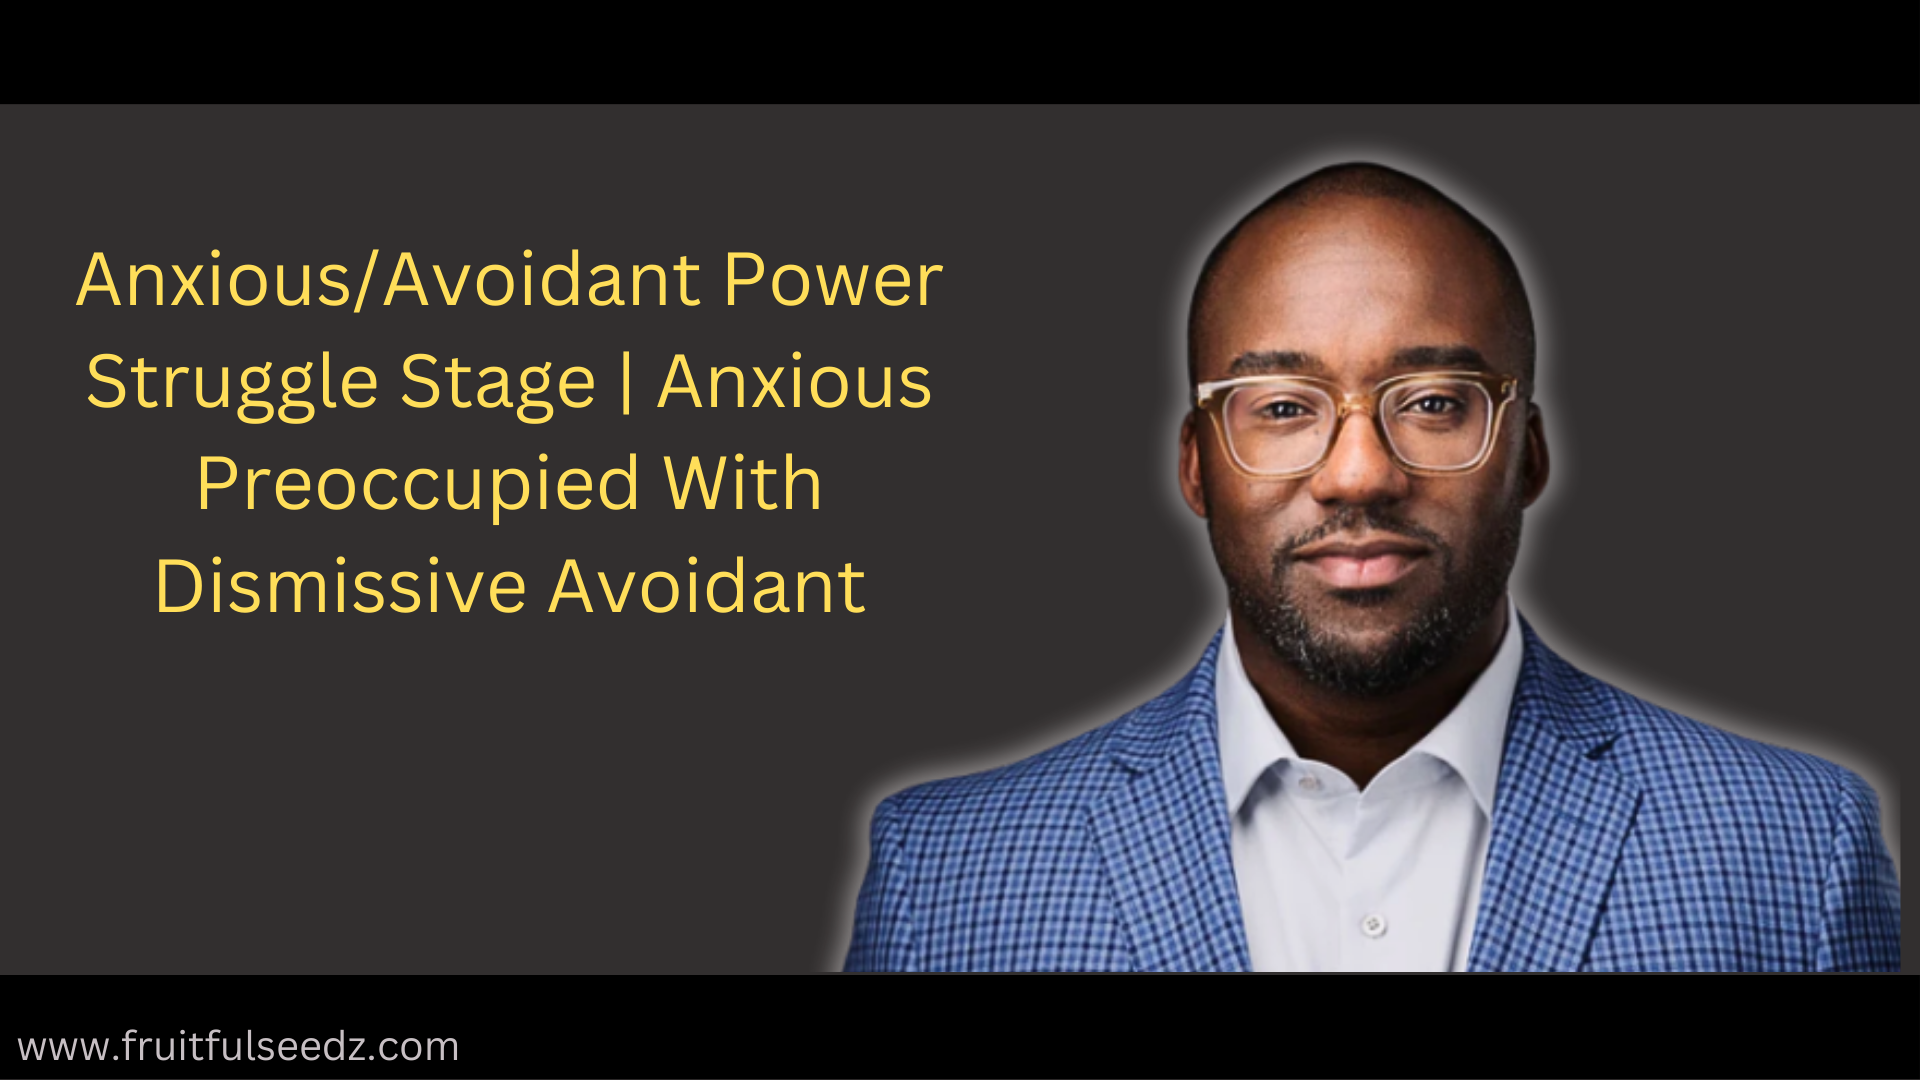 Anxious/Avoidant Power Struggle Stage | Anxious Preoccupied With Dismissive Avoidant